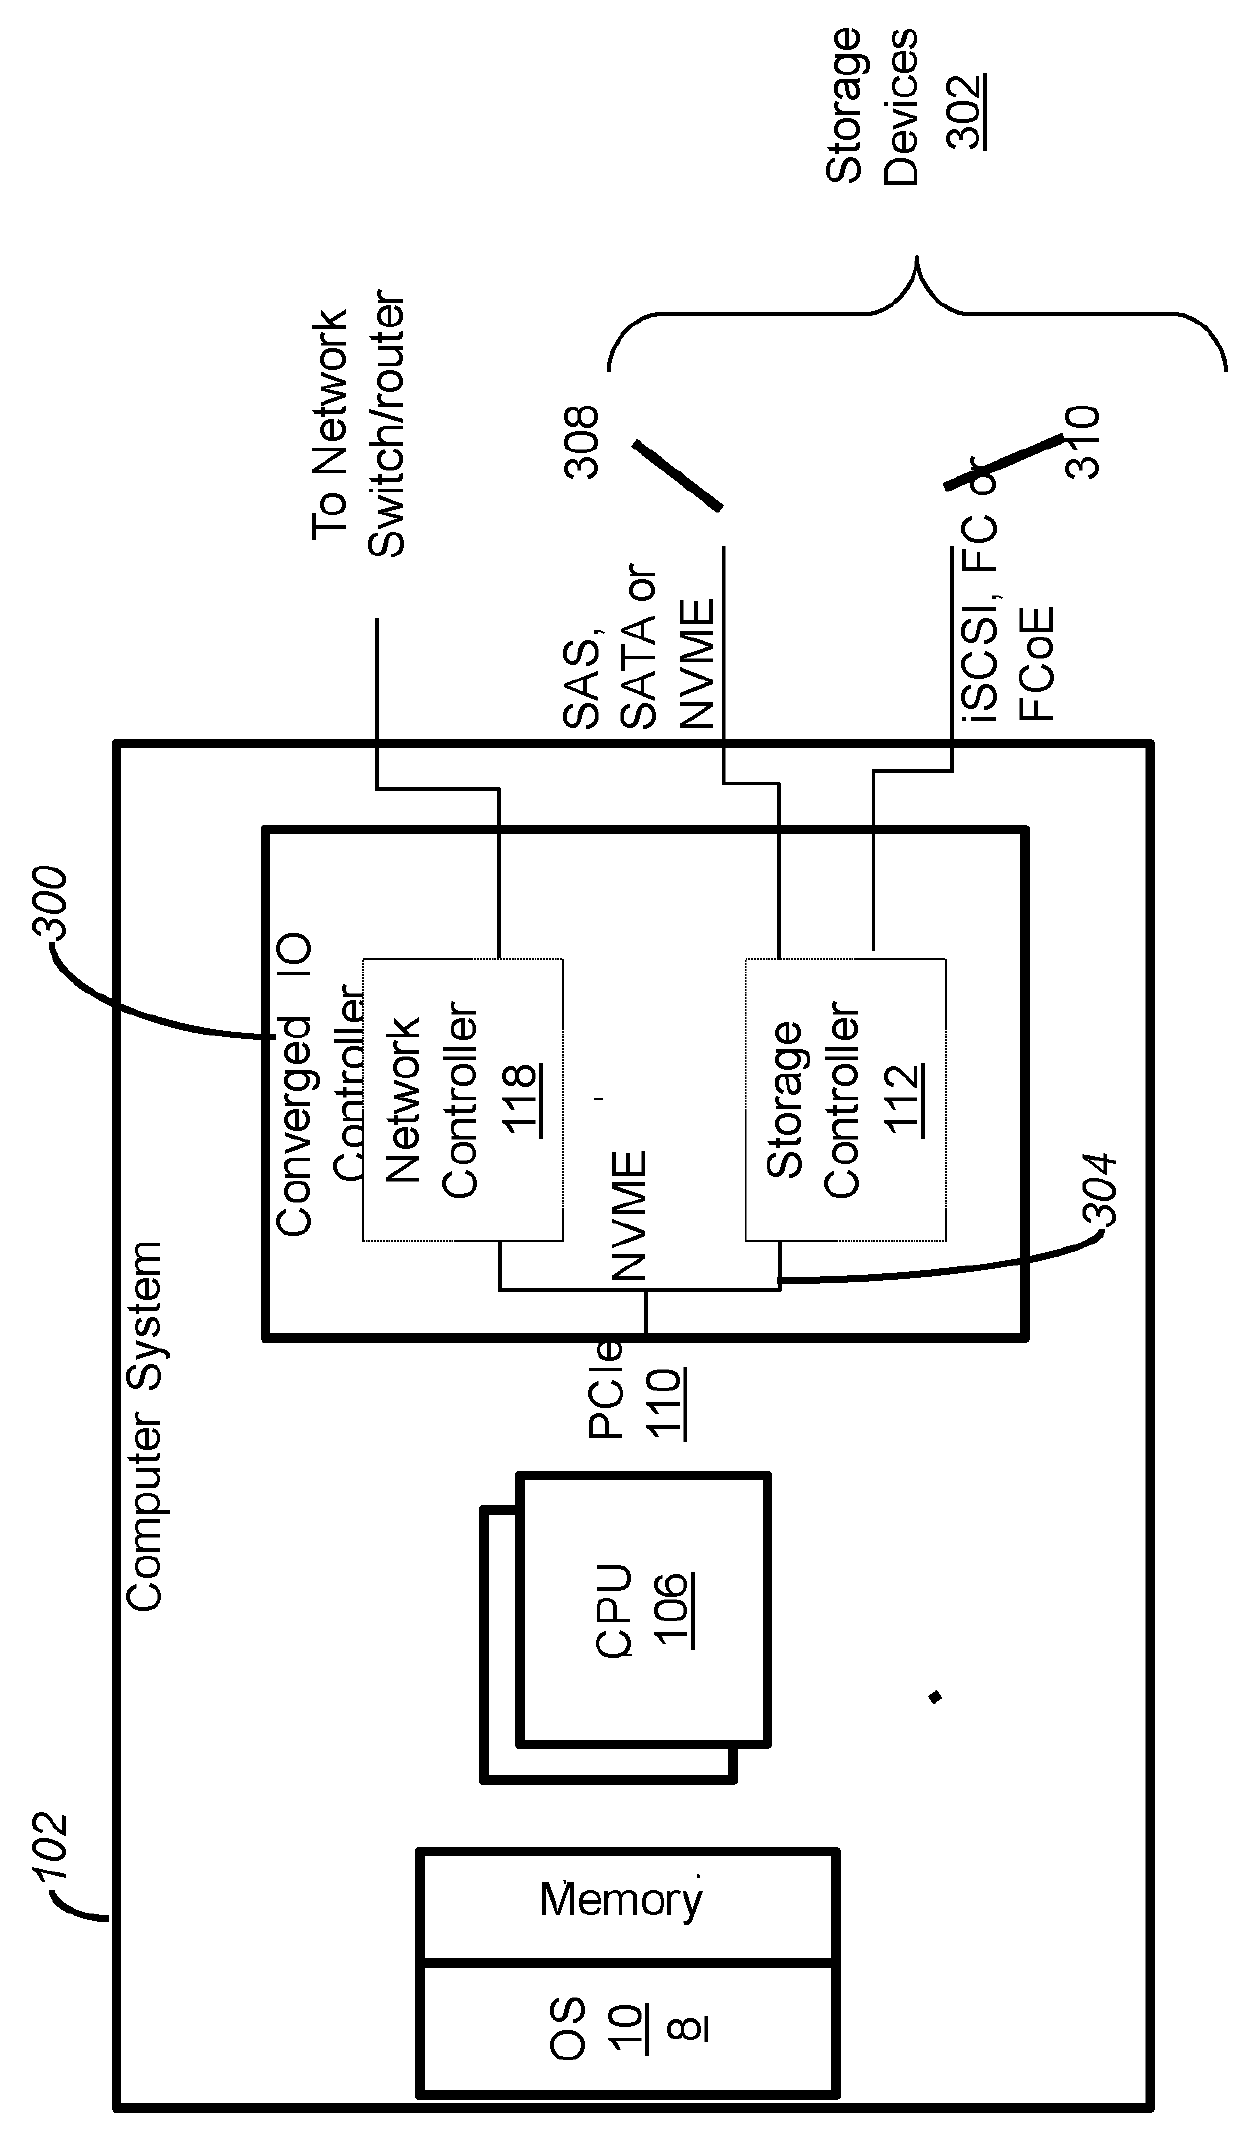 Enabling use of non-volatile media - express (NVME) over a network